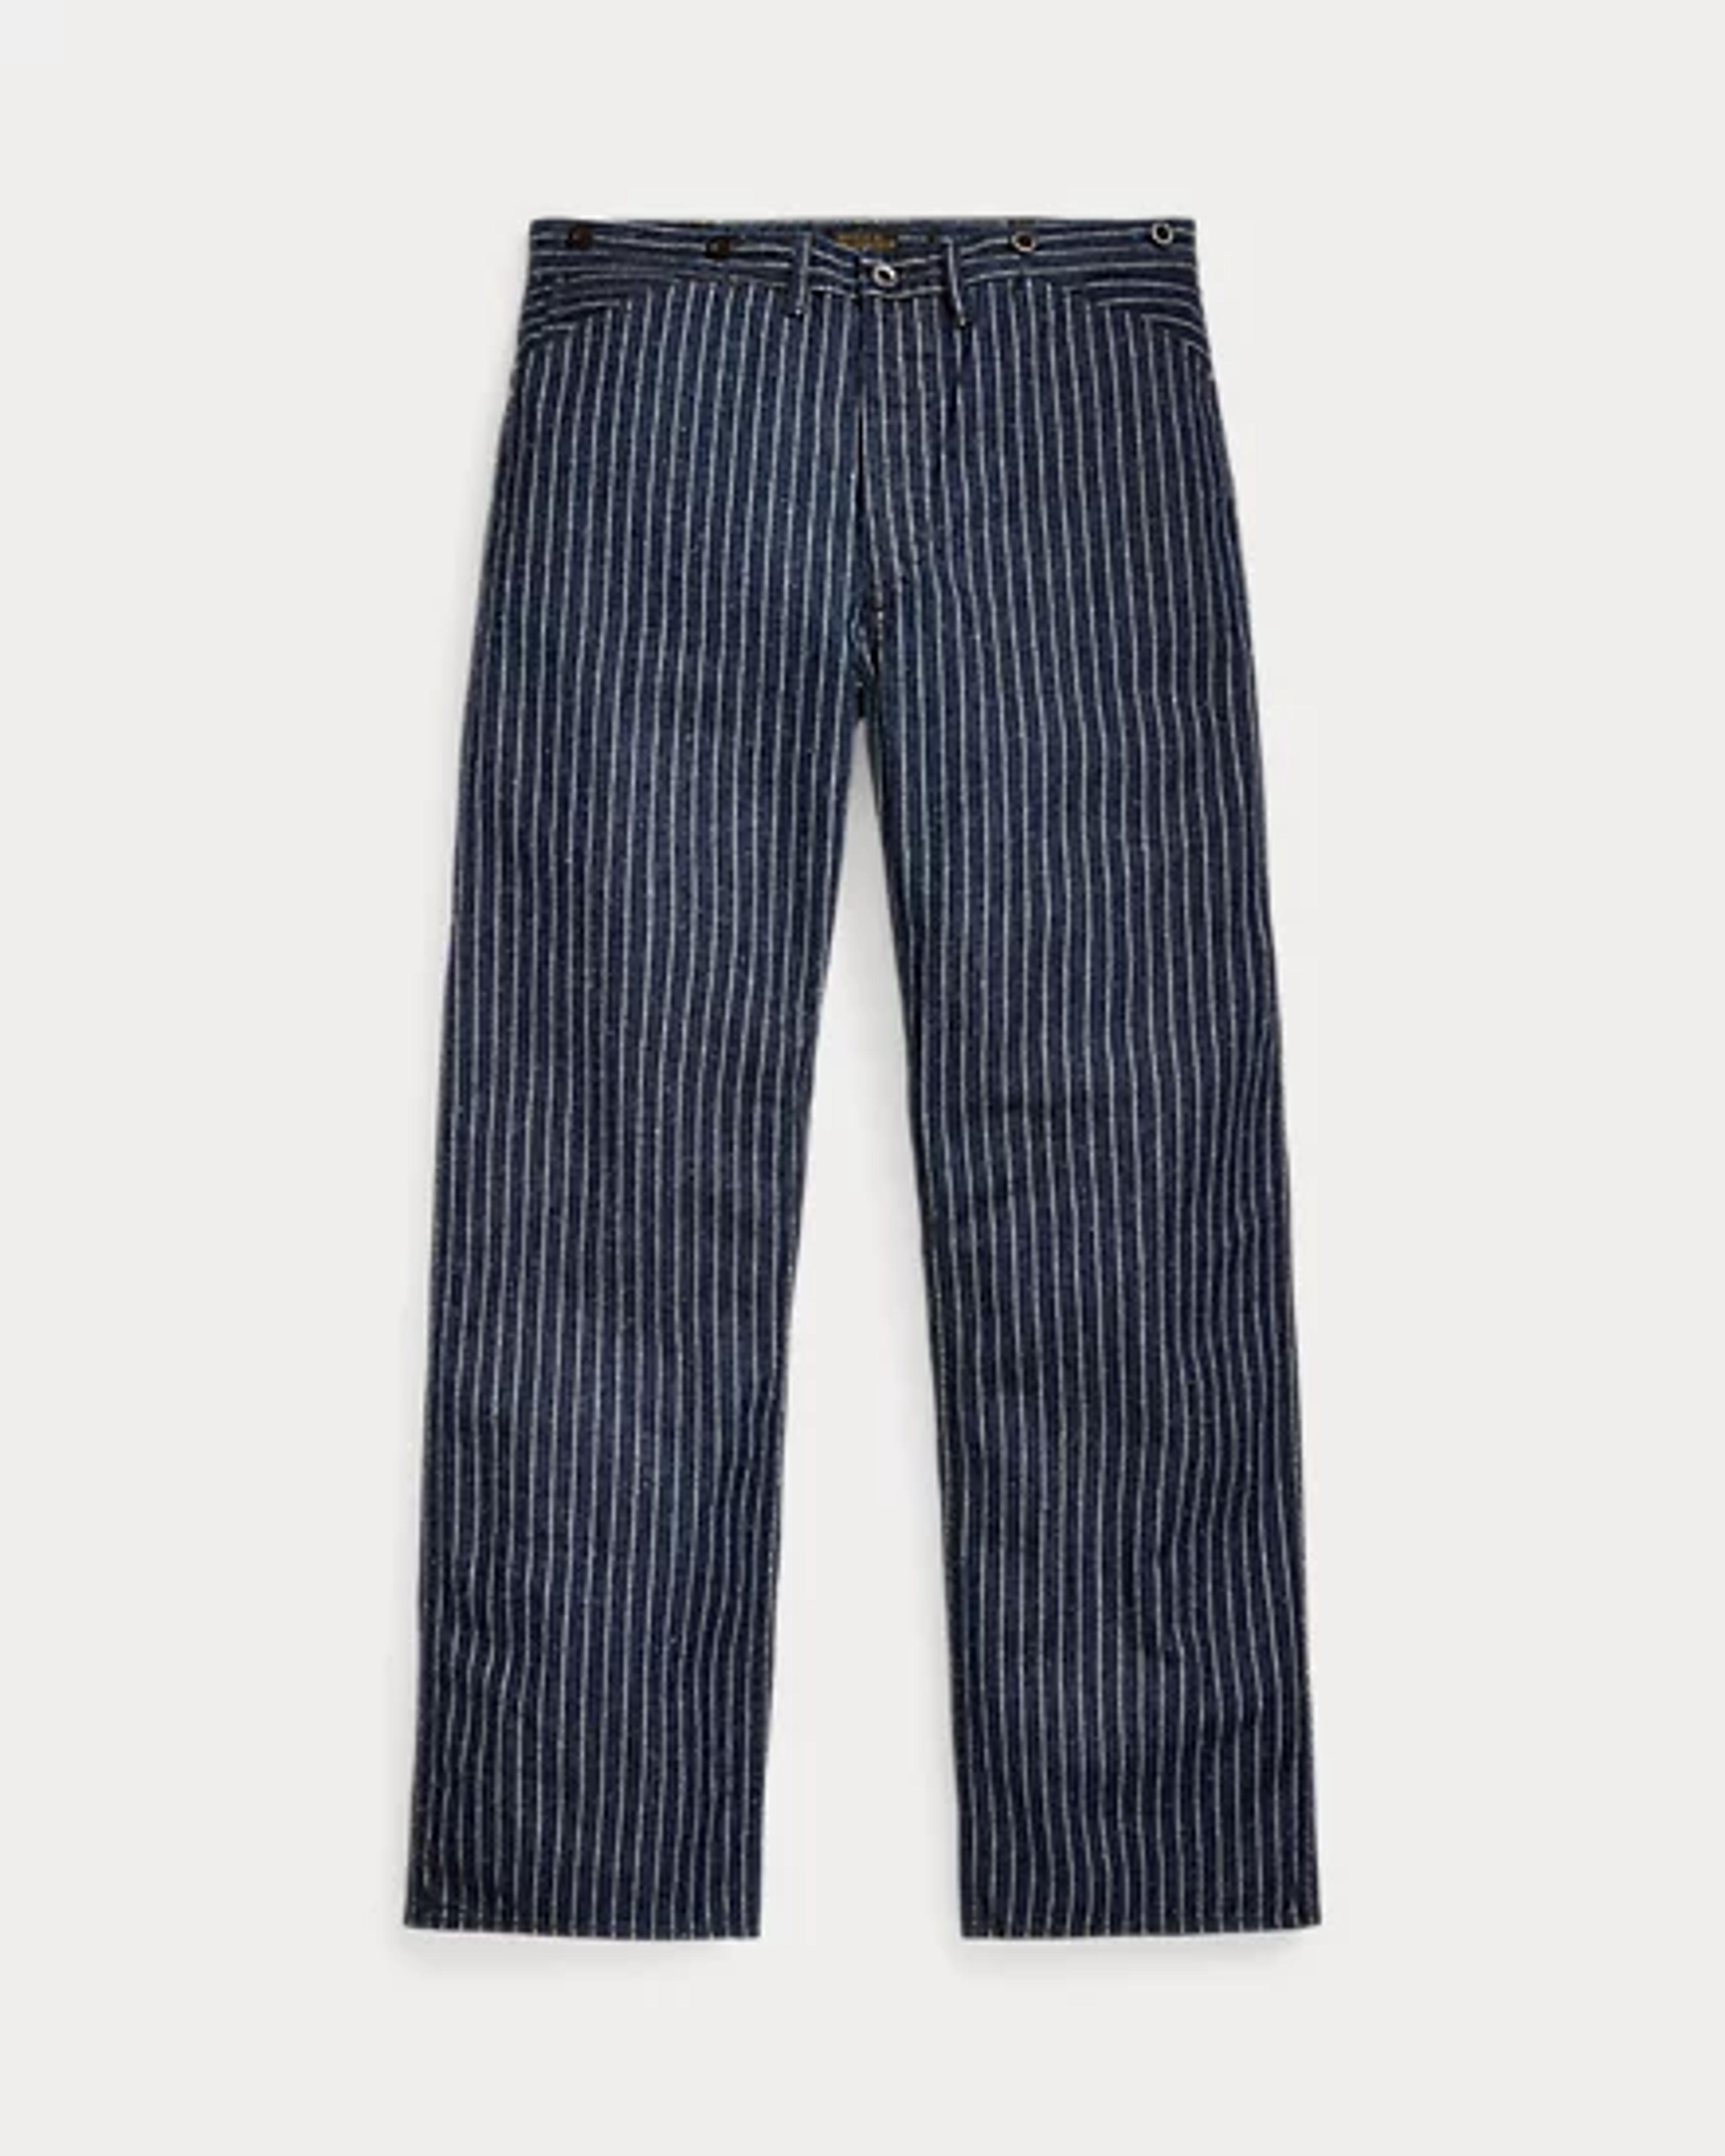 Limited-Edition Striped Denim Pant